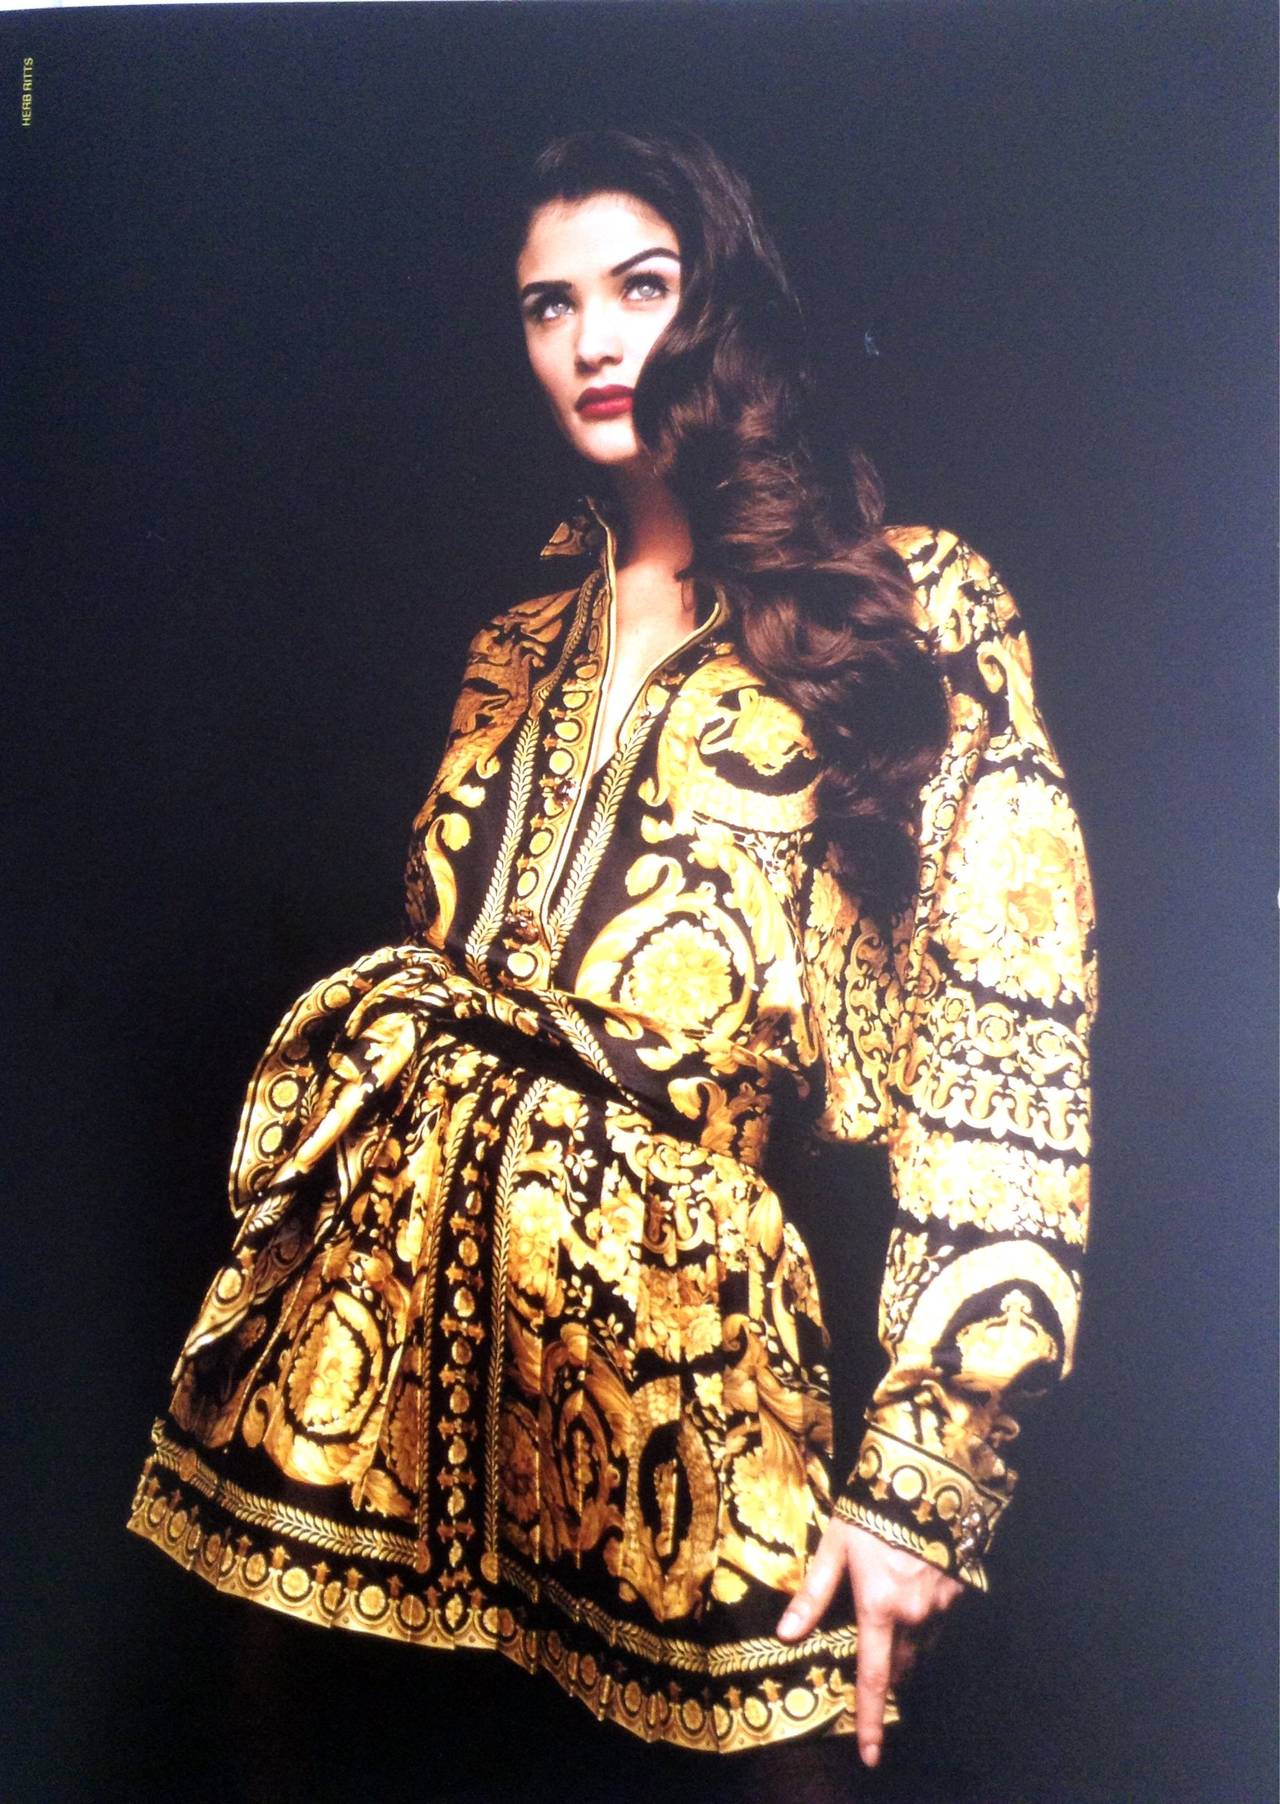 Museum Quality Gianni Versace Silk Baroque Printed Pleated Skirt Fall 1991 In Excellent Condition For Sale In W1, GB